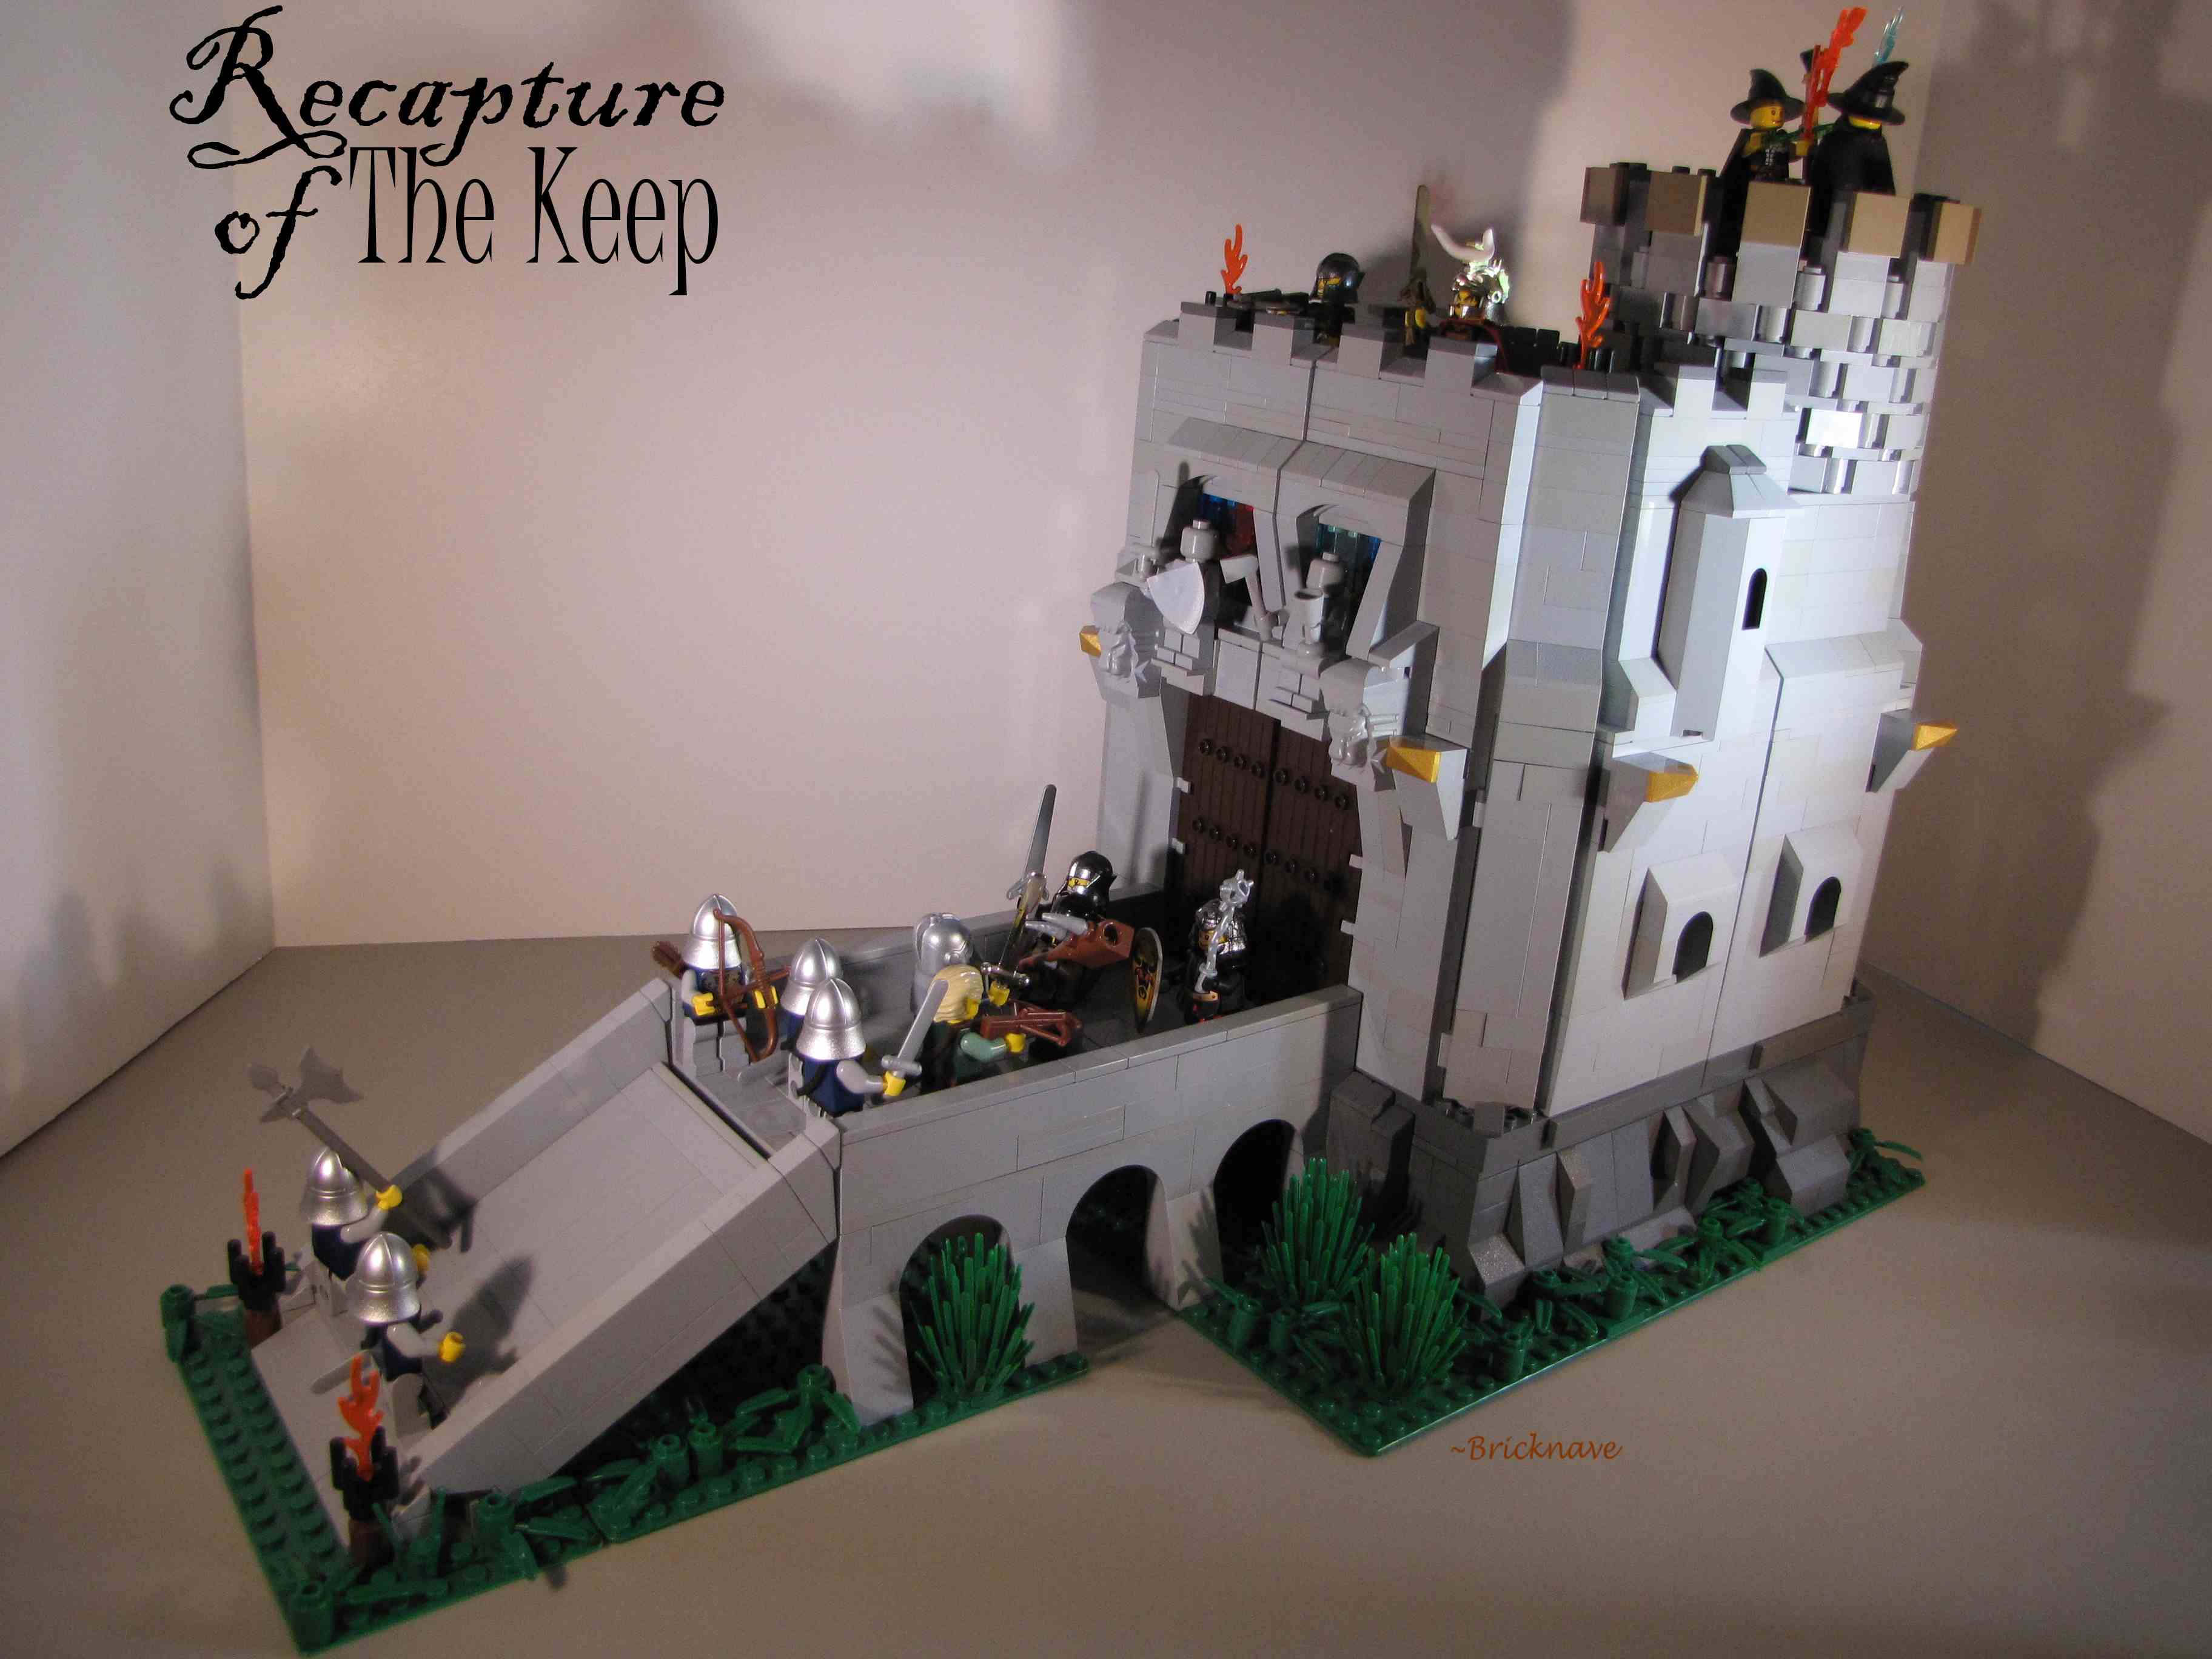 Recapture of the Keep